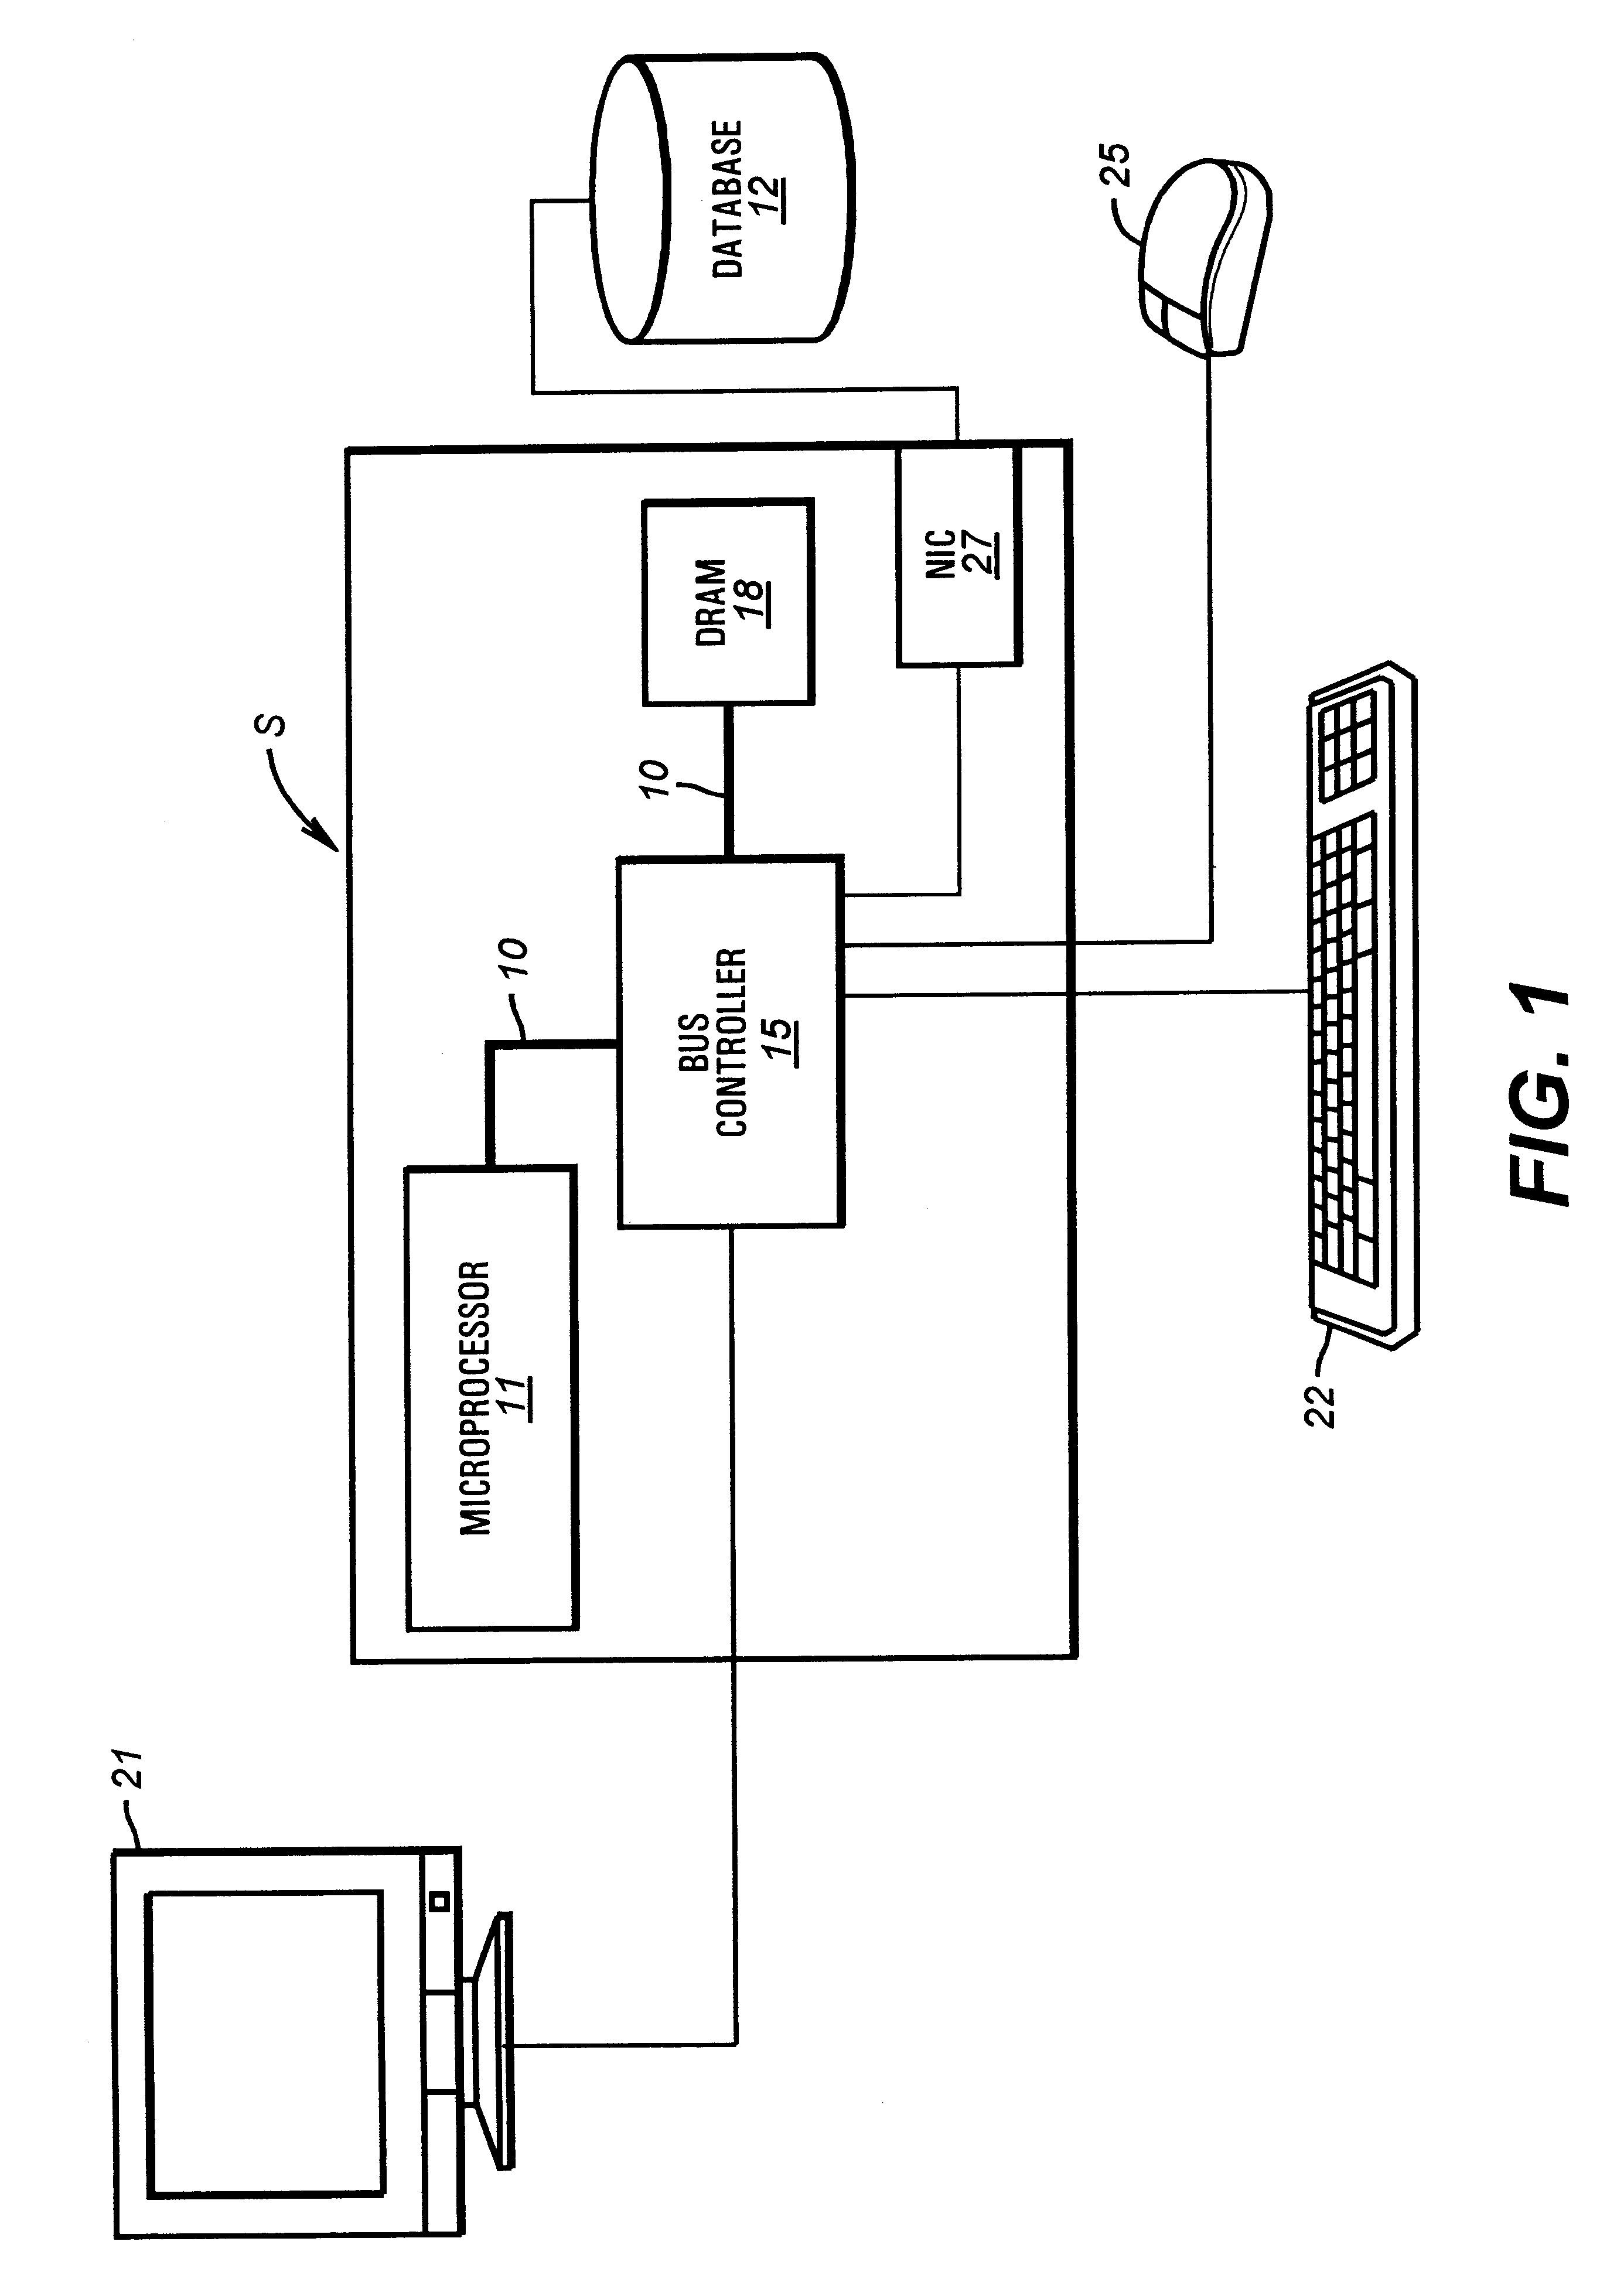 Graphical user interface for testability operation